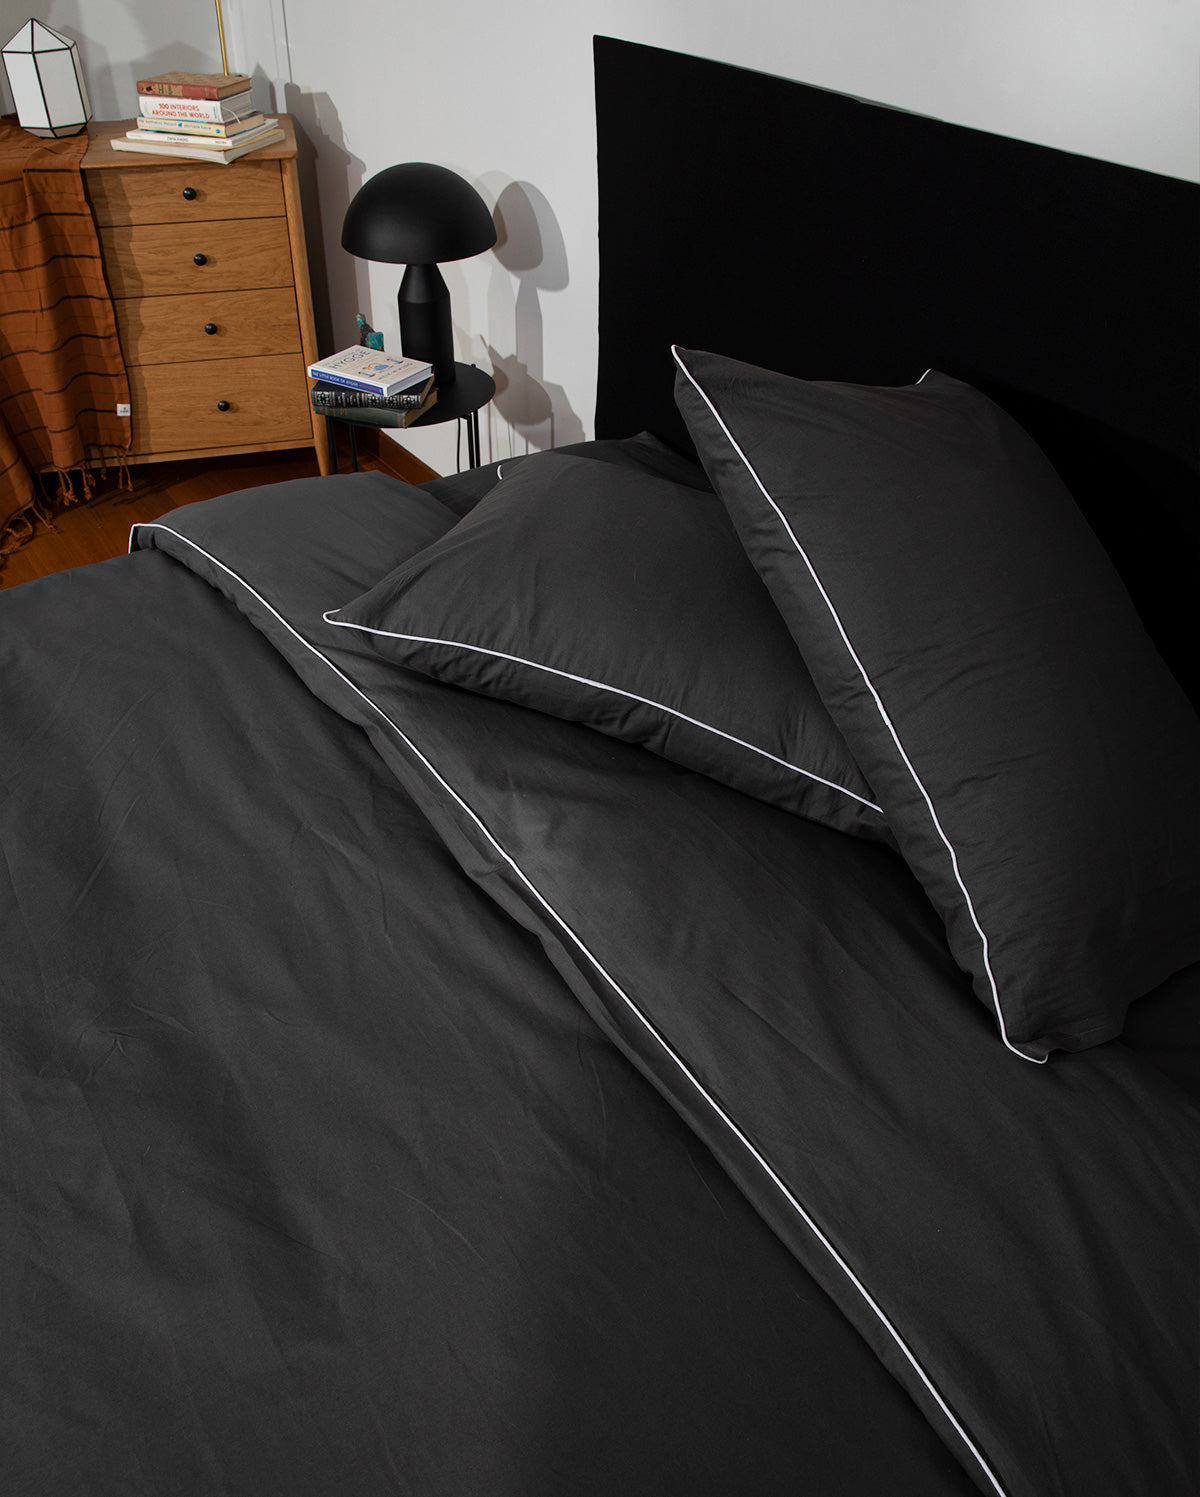 Classic Percale - Duvet Cover Set- Anthracite with White Piped Edge